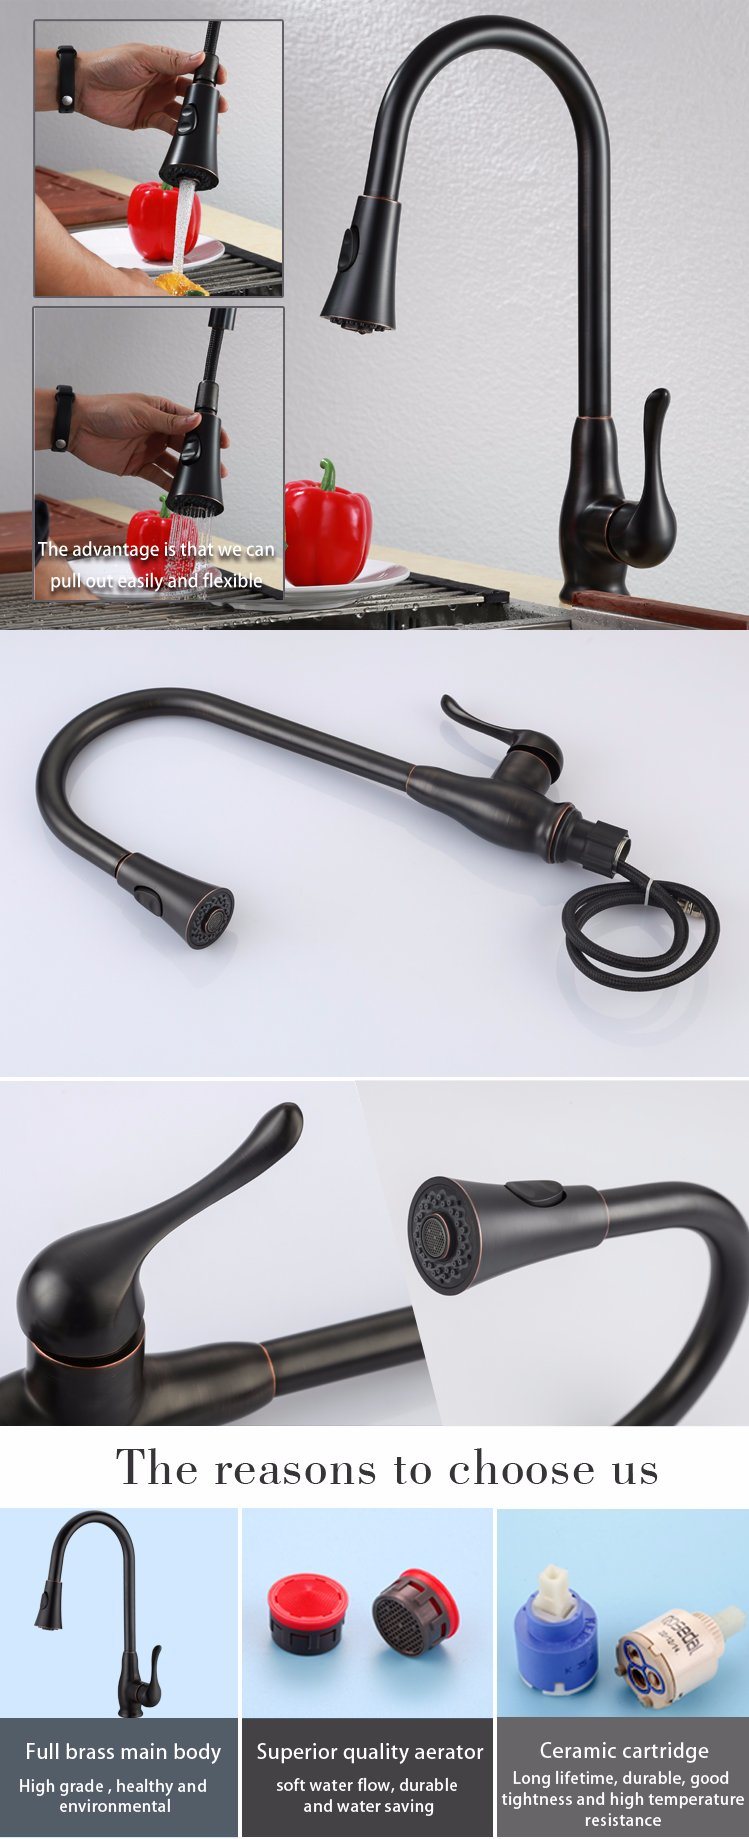 Factory Price Pull out Sprayer Orb Antique Black Brass Kitchen Faucet From Wide